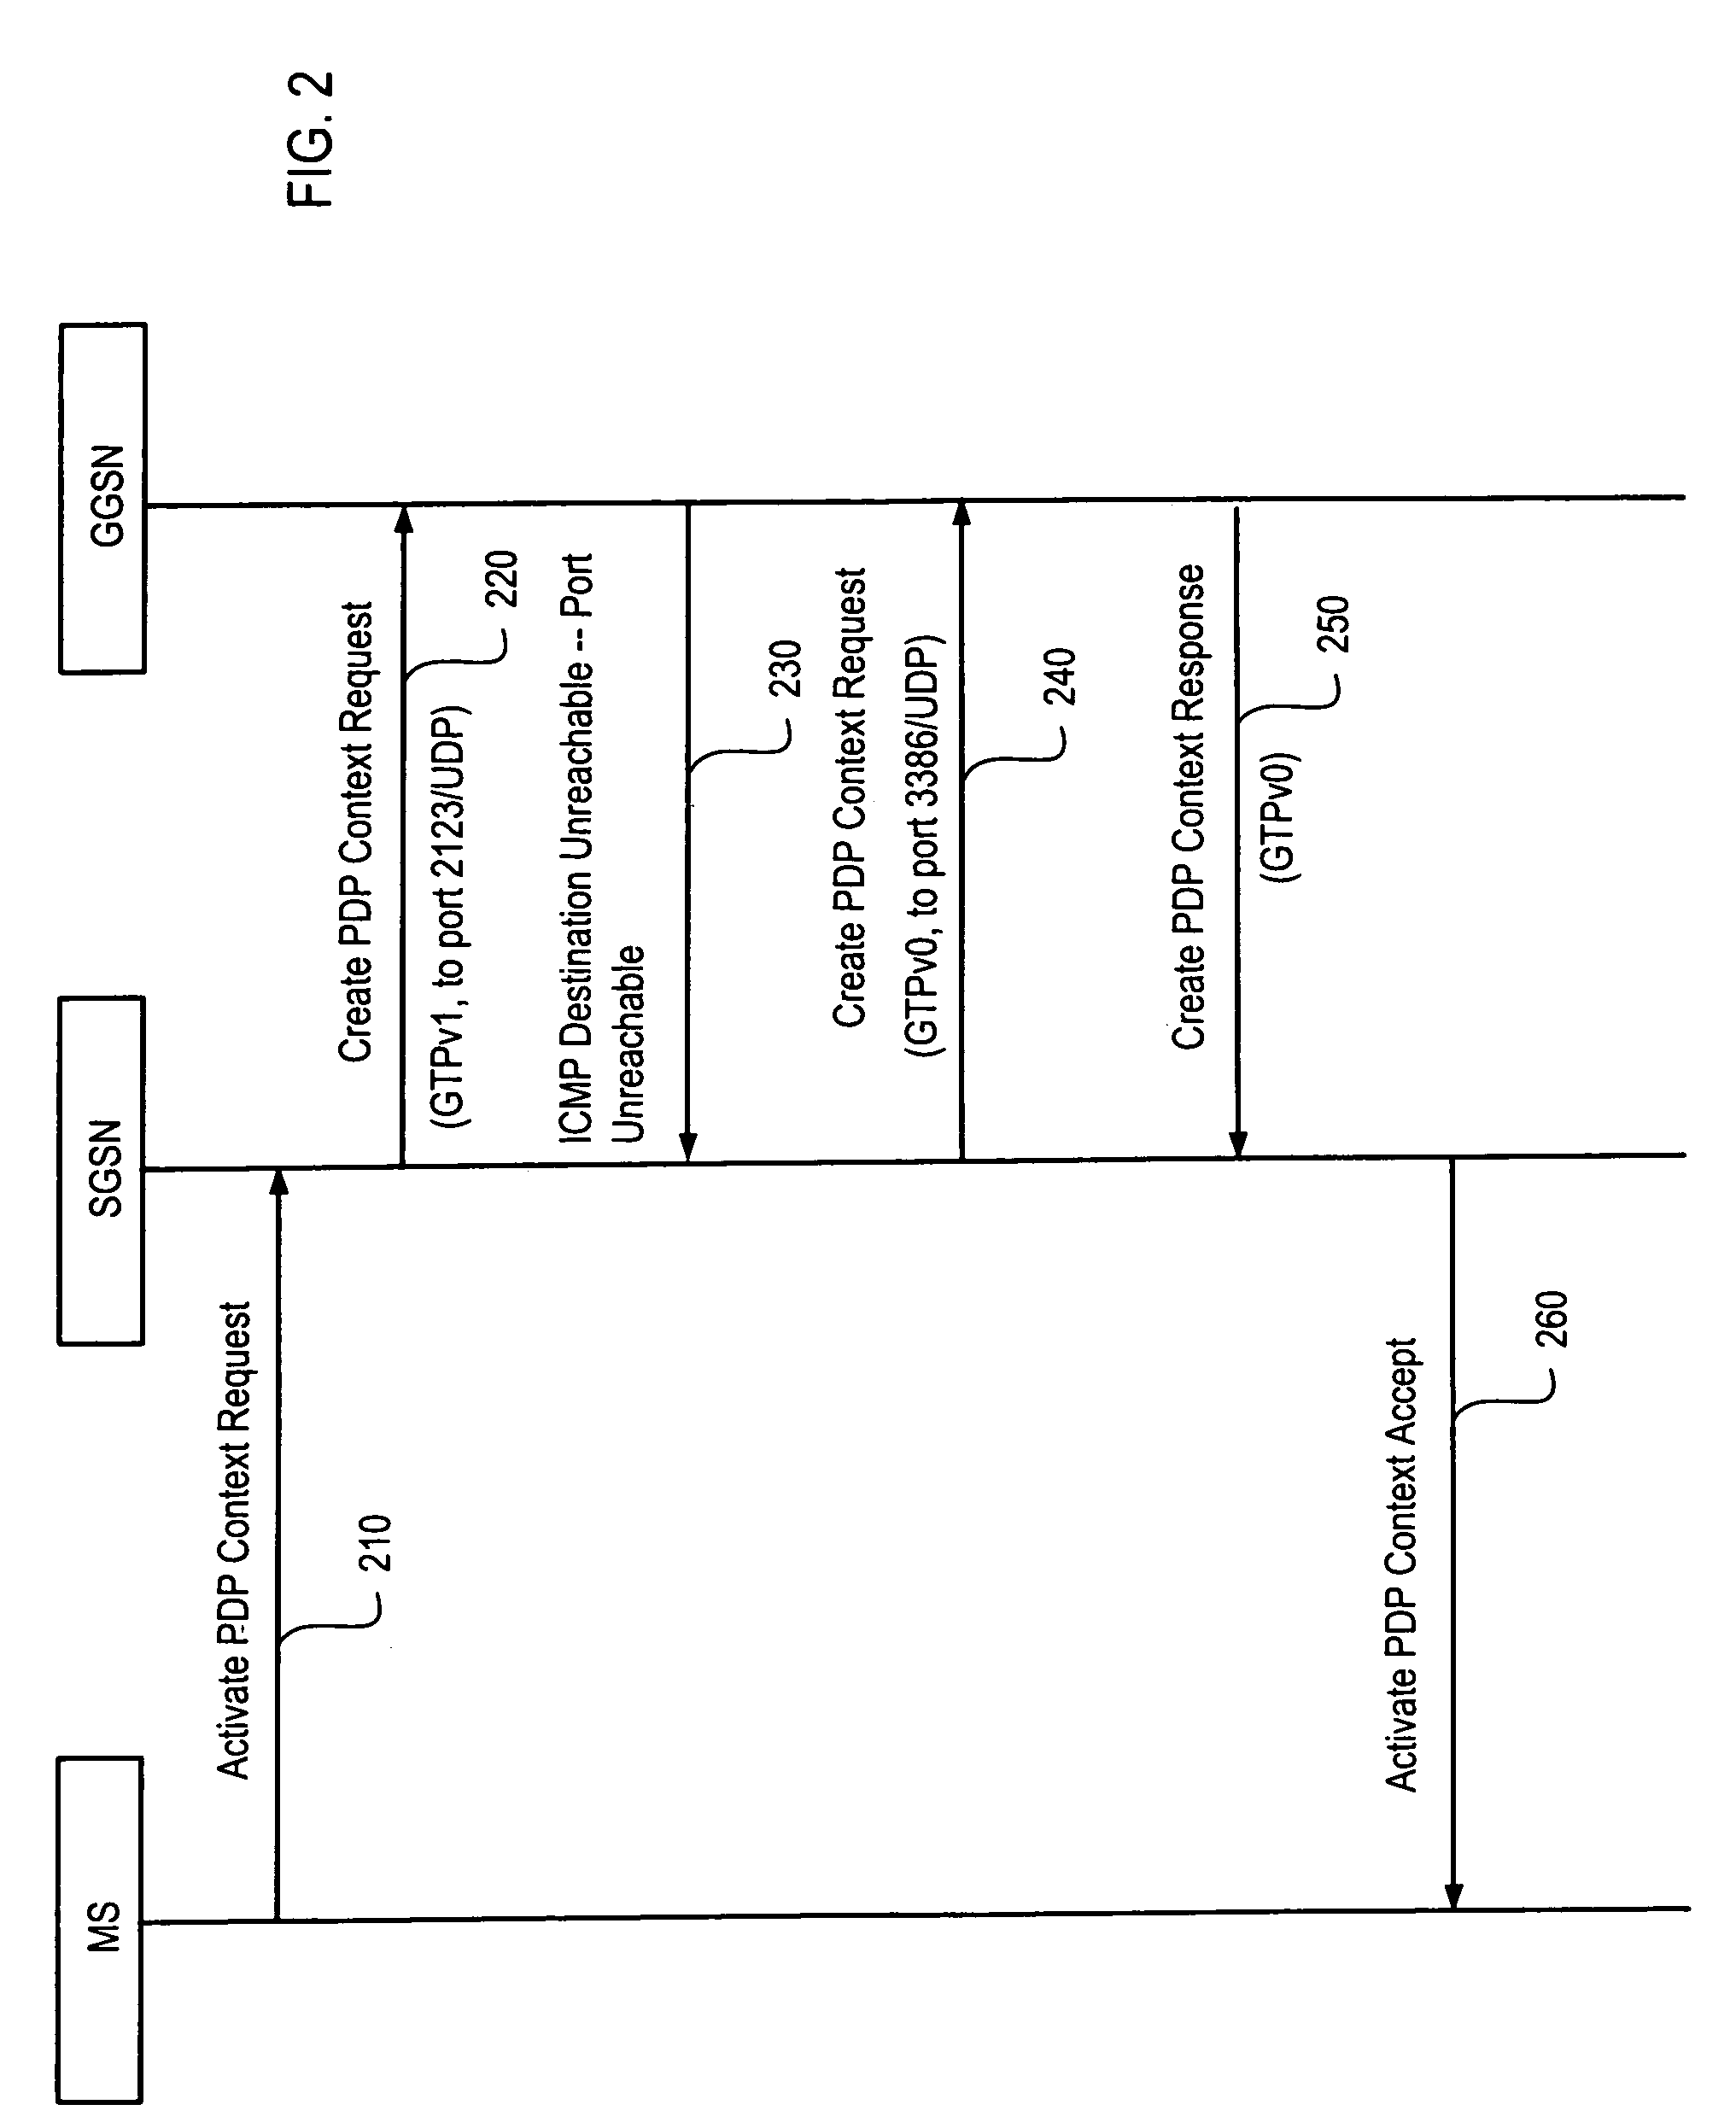 Methods of detecting protocol support in wireless communication systems